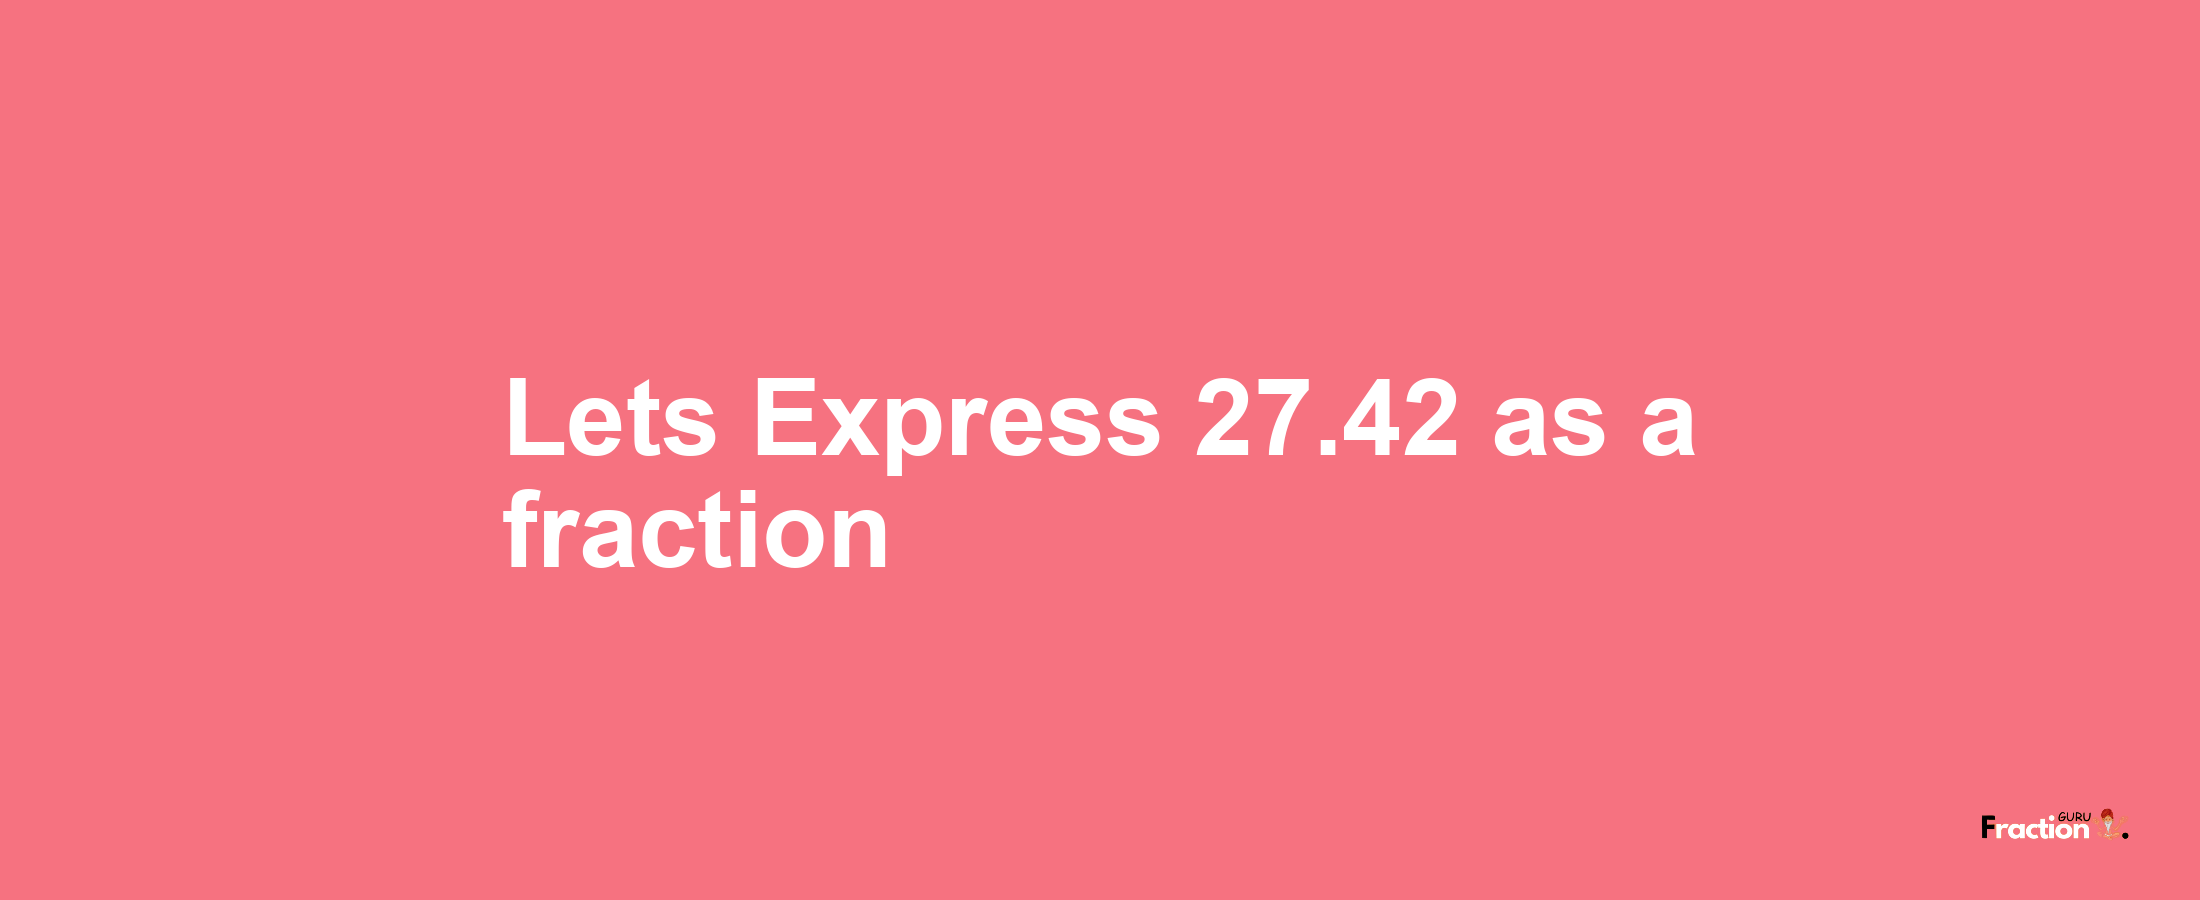 Lets Express 27.42 as afraction